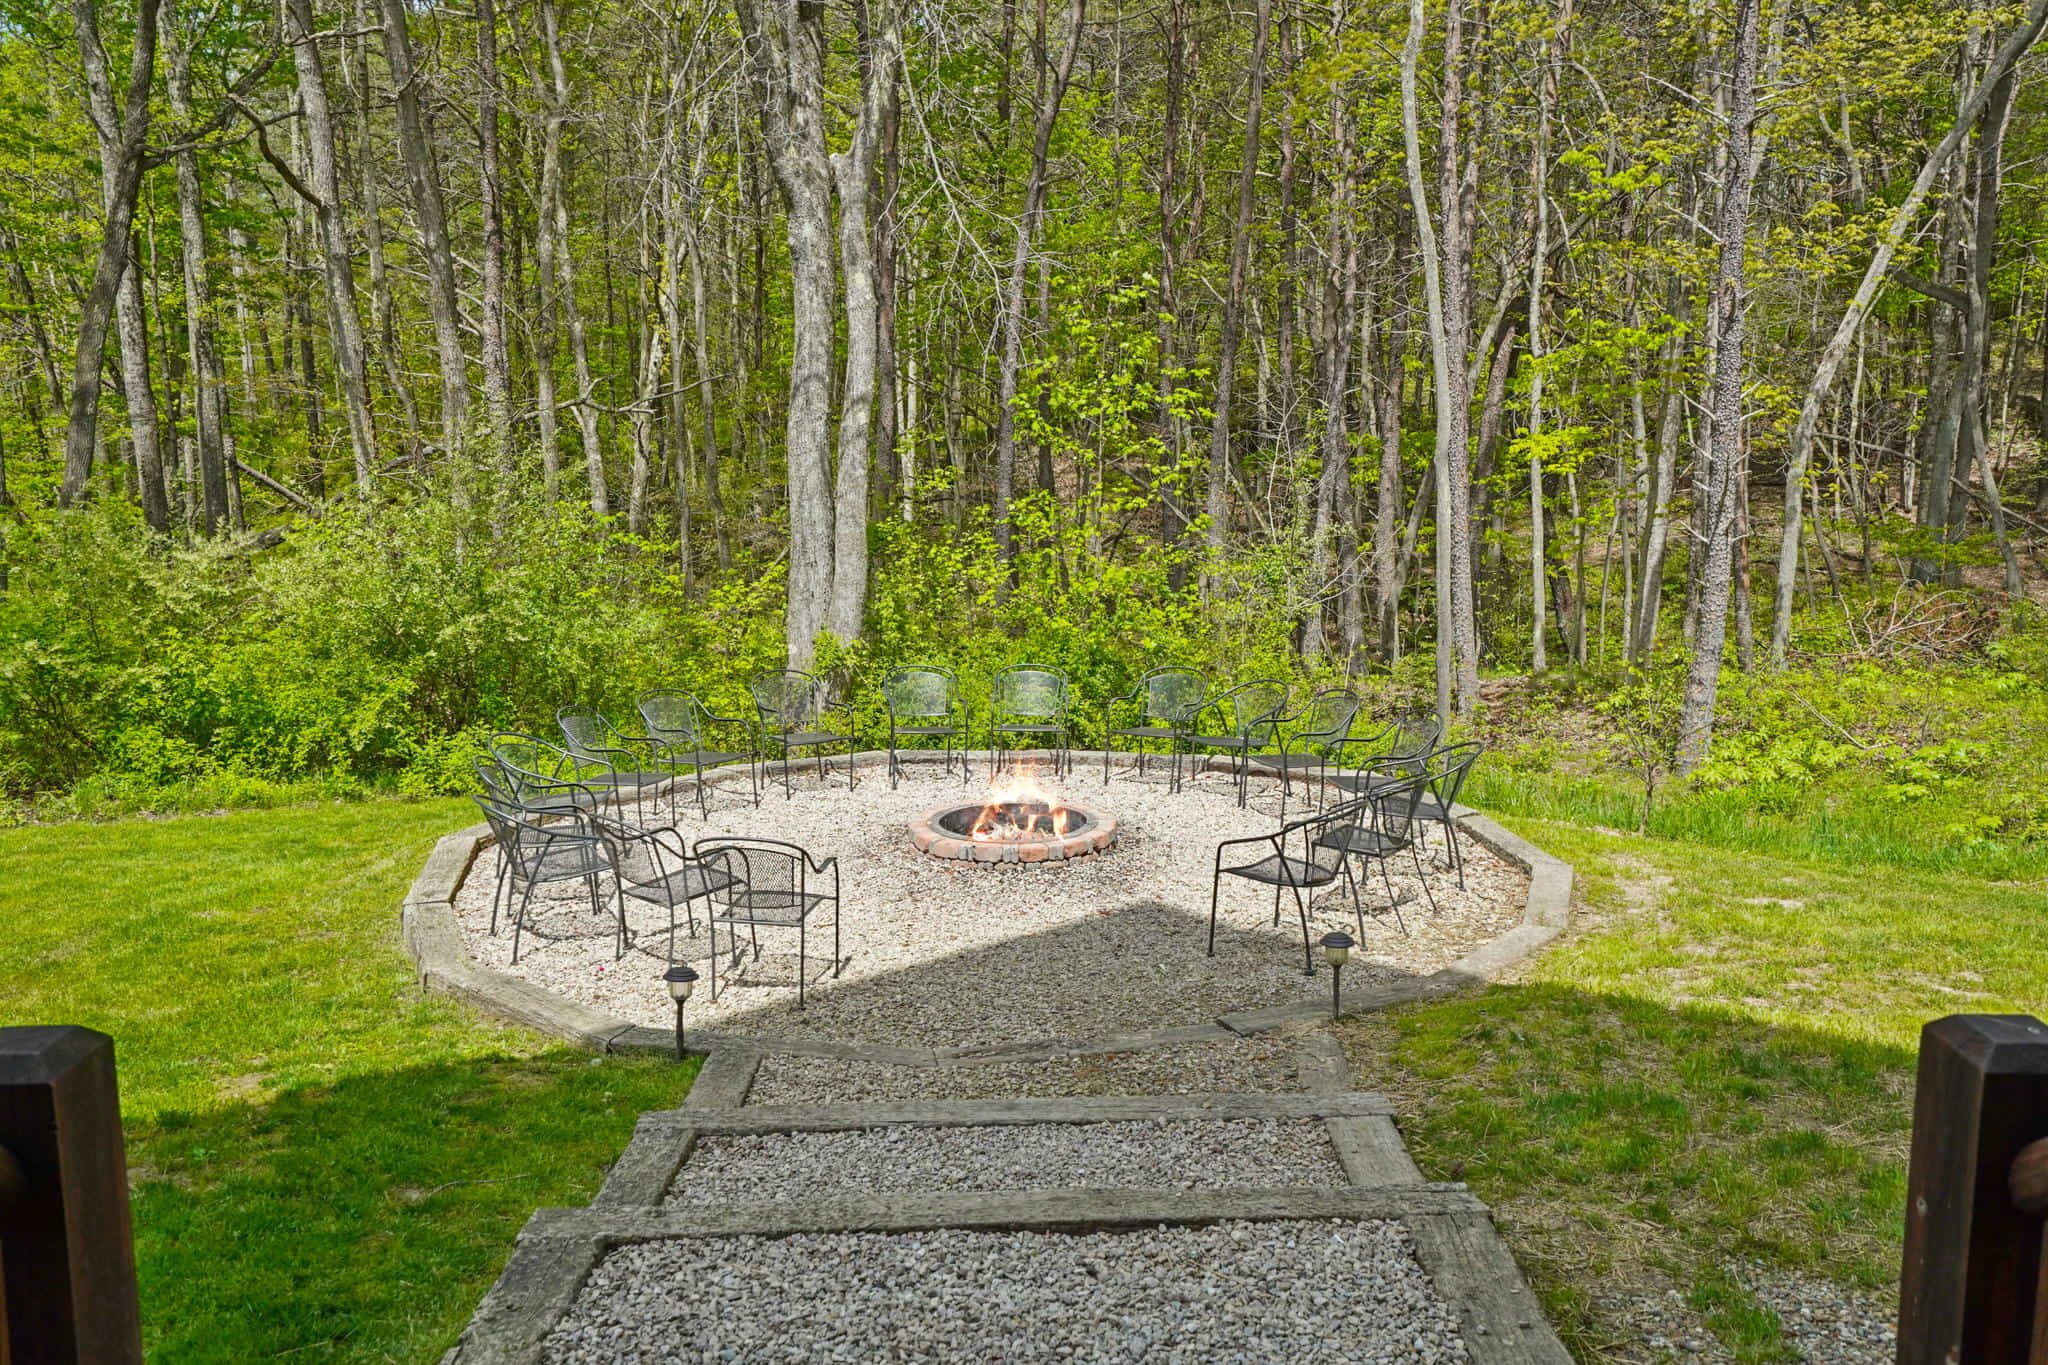 Fire pit for River Rock Lodge in Hocking Hills Ohio